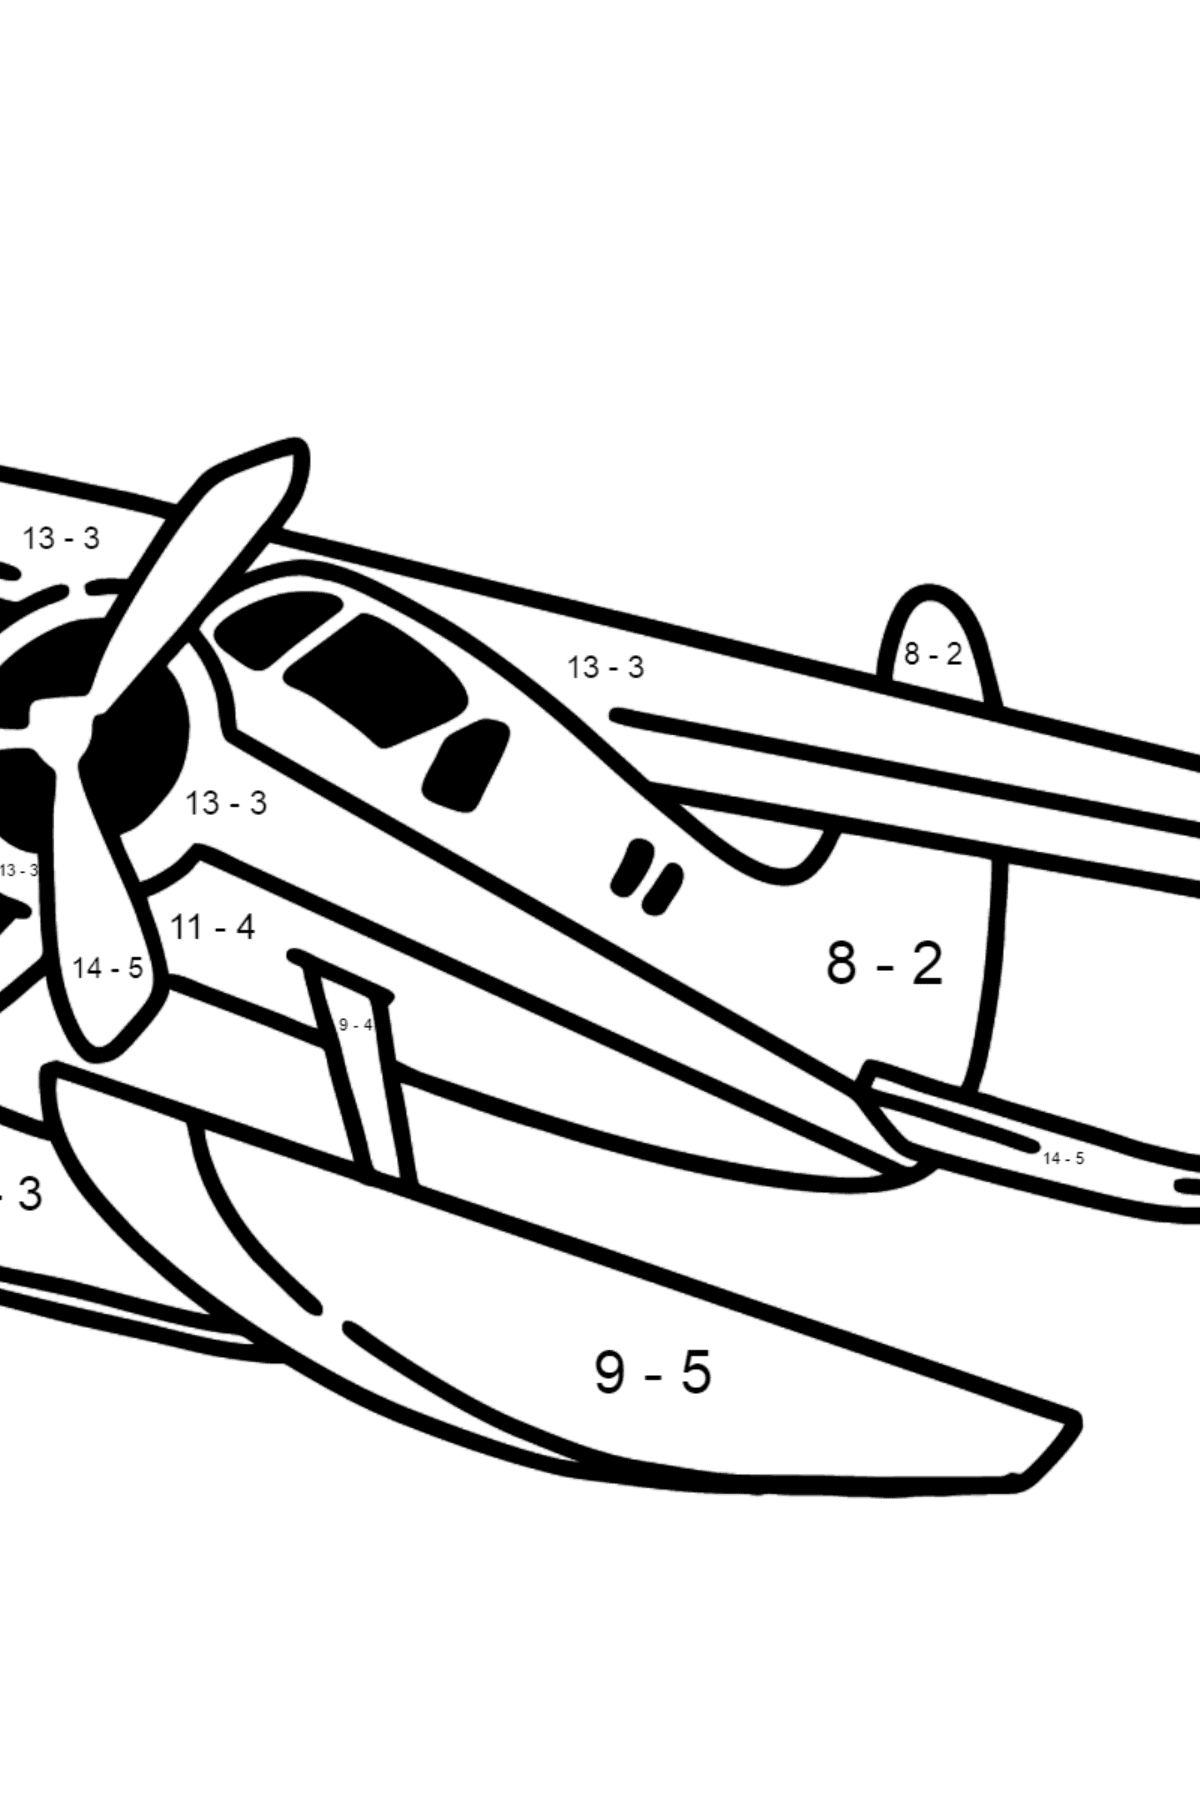 Jet Airplane BE-200 coloring page - Math Coloring - Subtraction for Kids